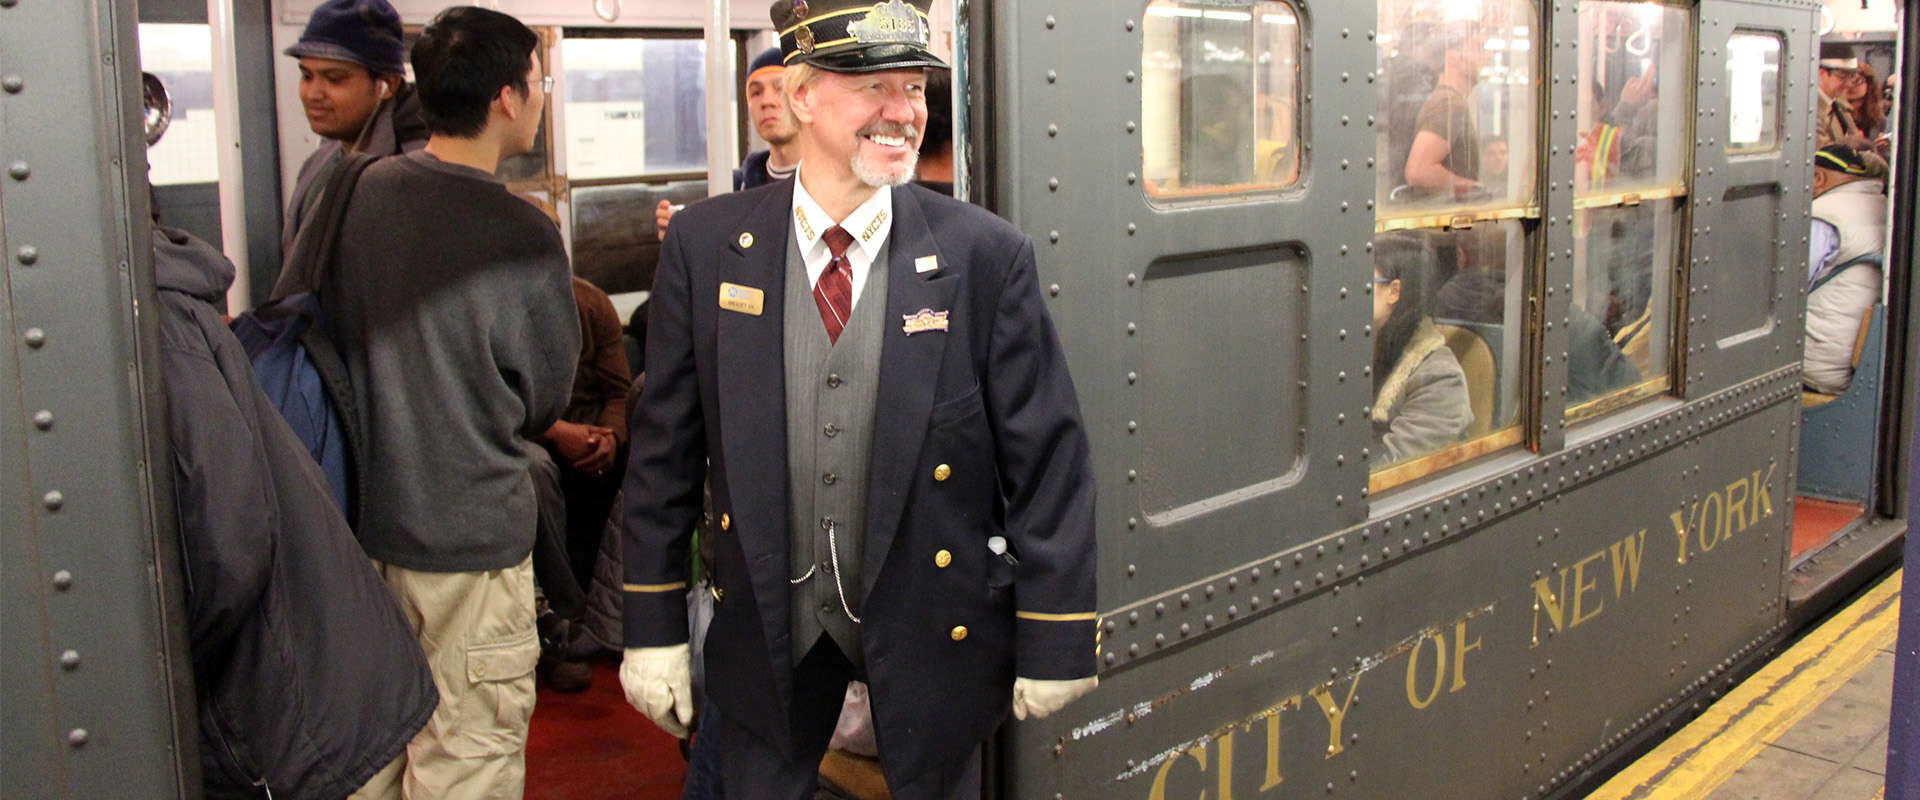 Conductor with vintage 1930s train